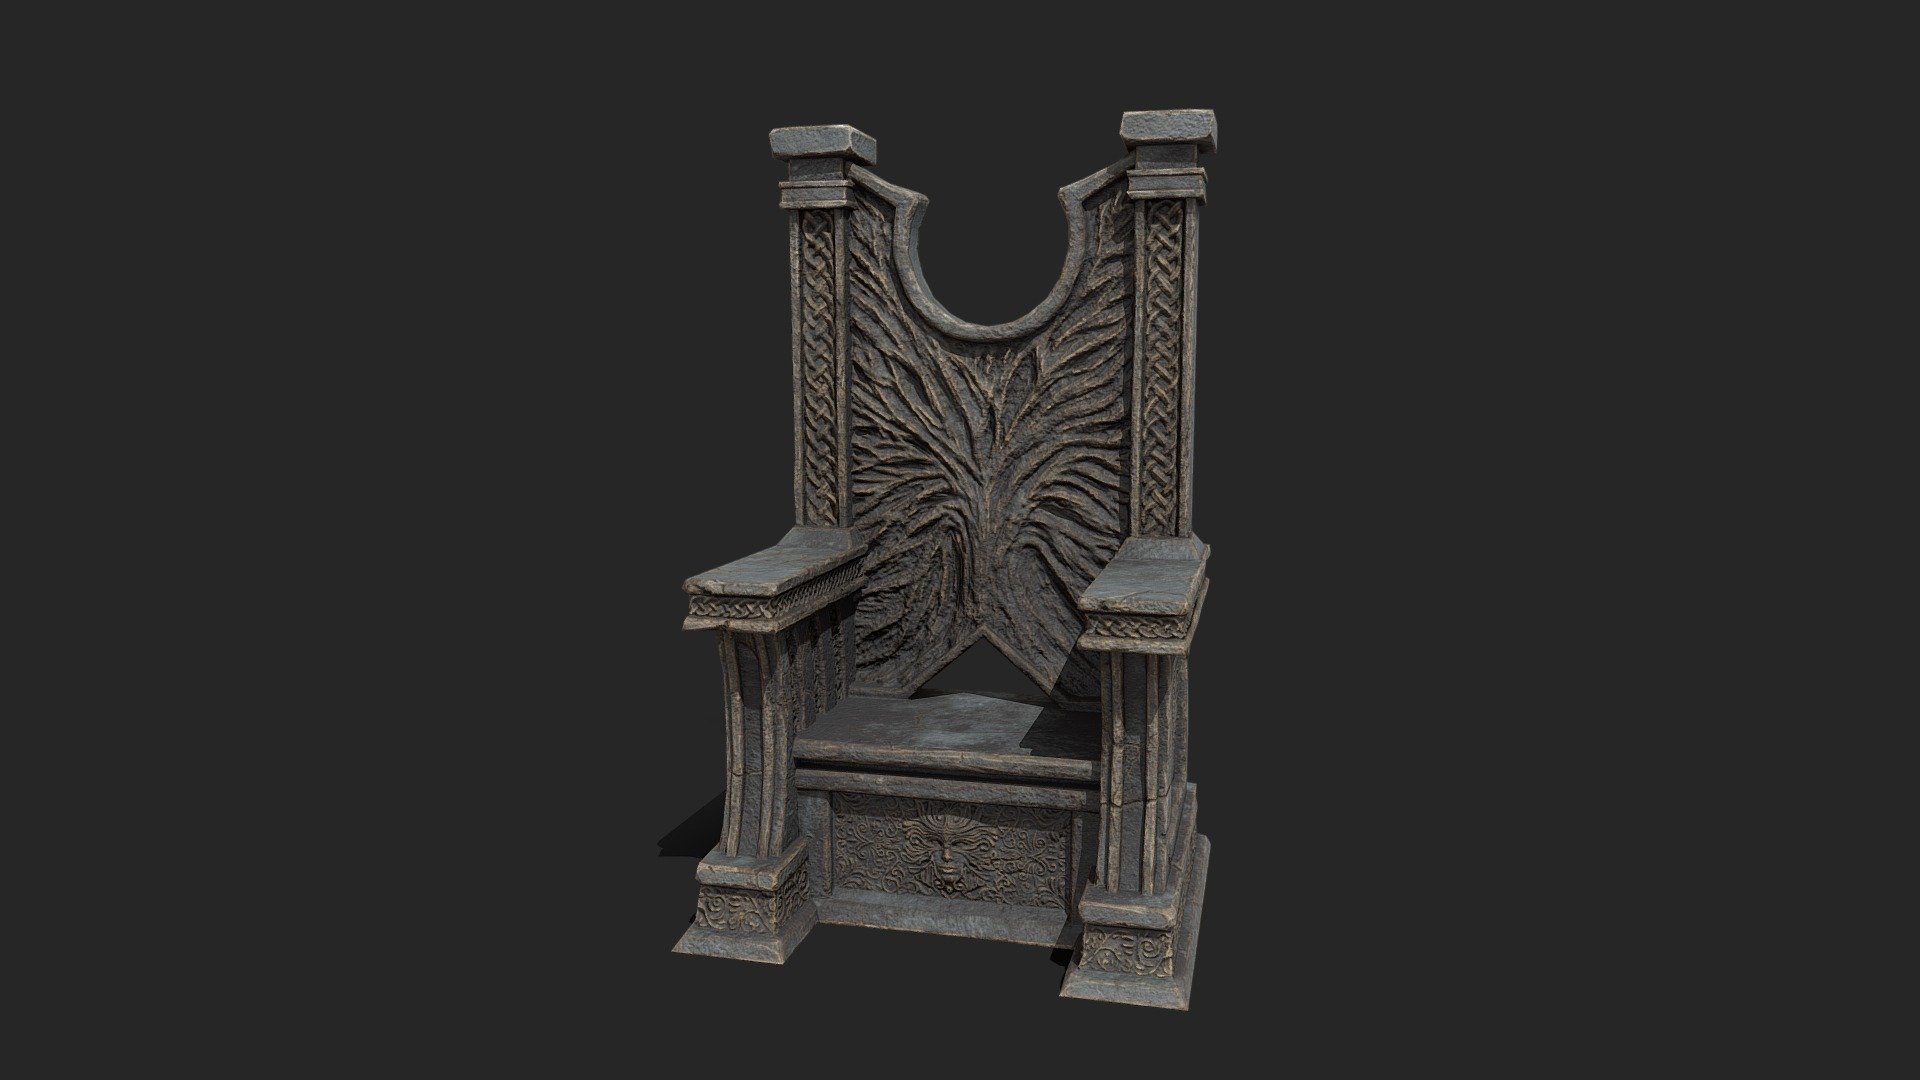 Stone throne

4096x4096 JPG texture

Textures include:

-Base Color

-Normal

-Roughness

-Metallic

-AO

Please comment or review if you like it 3d model